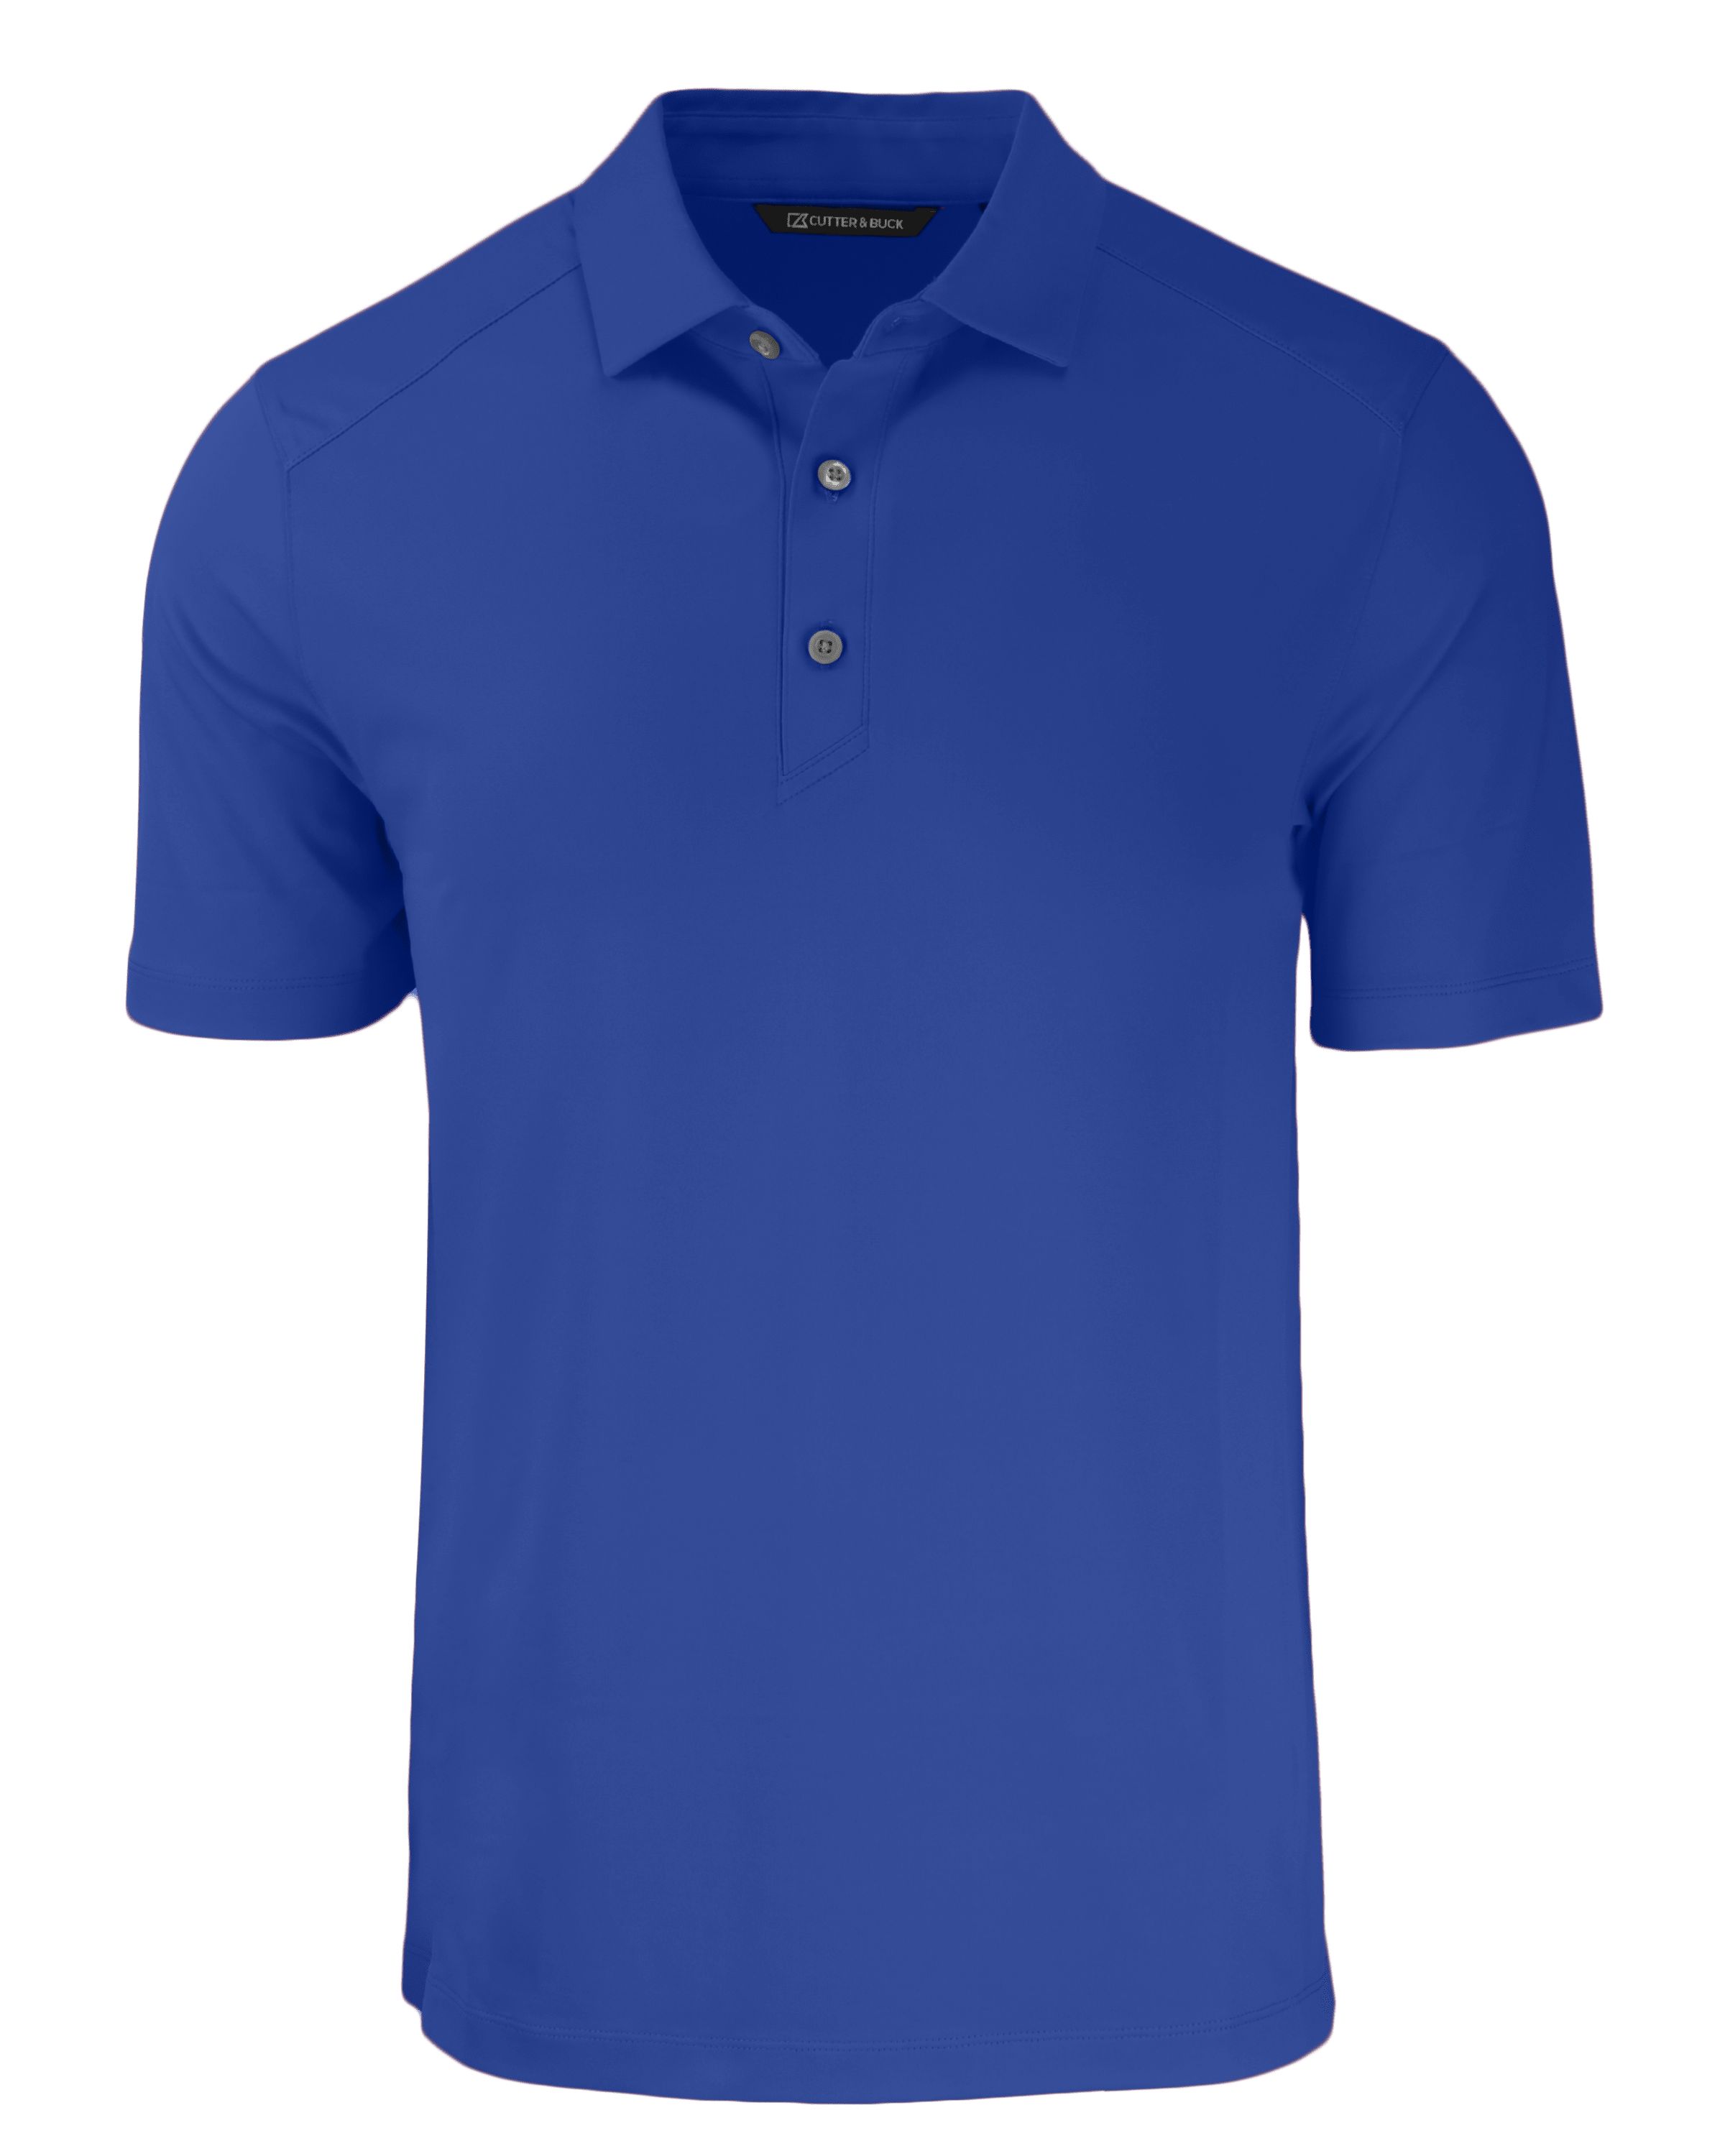 CUTTER & BUCK MCK01236 - Men's Forge Eco Stretch Recycled Polo